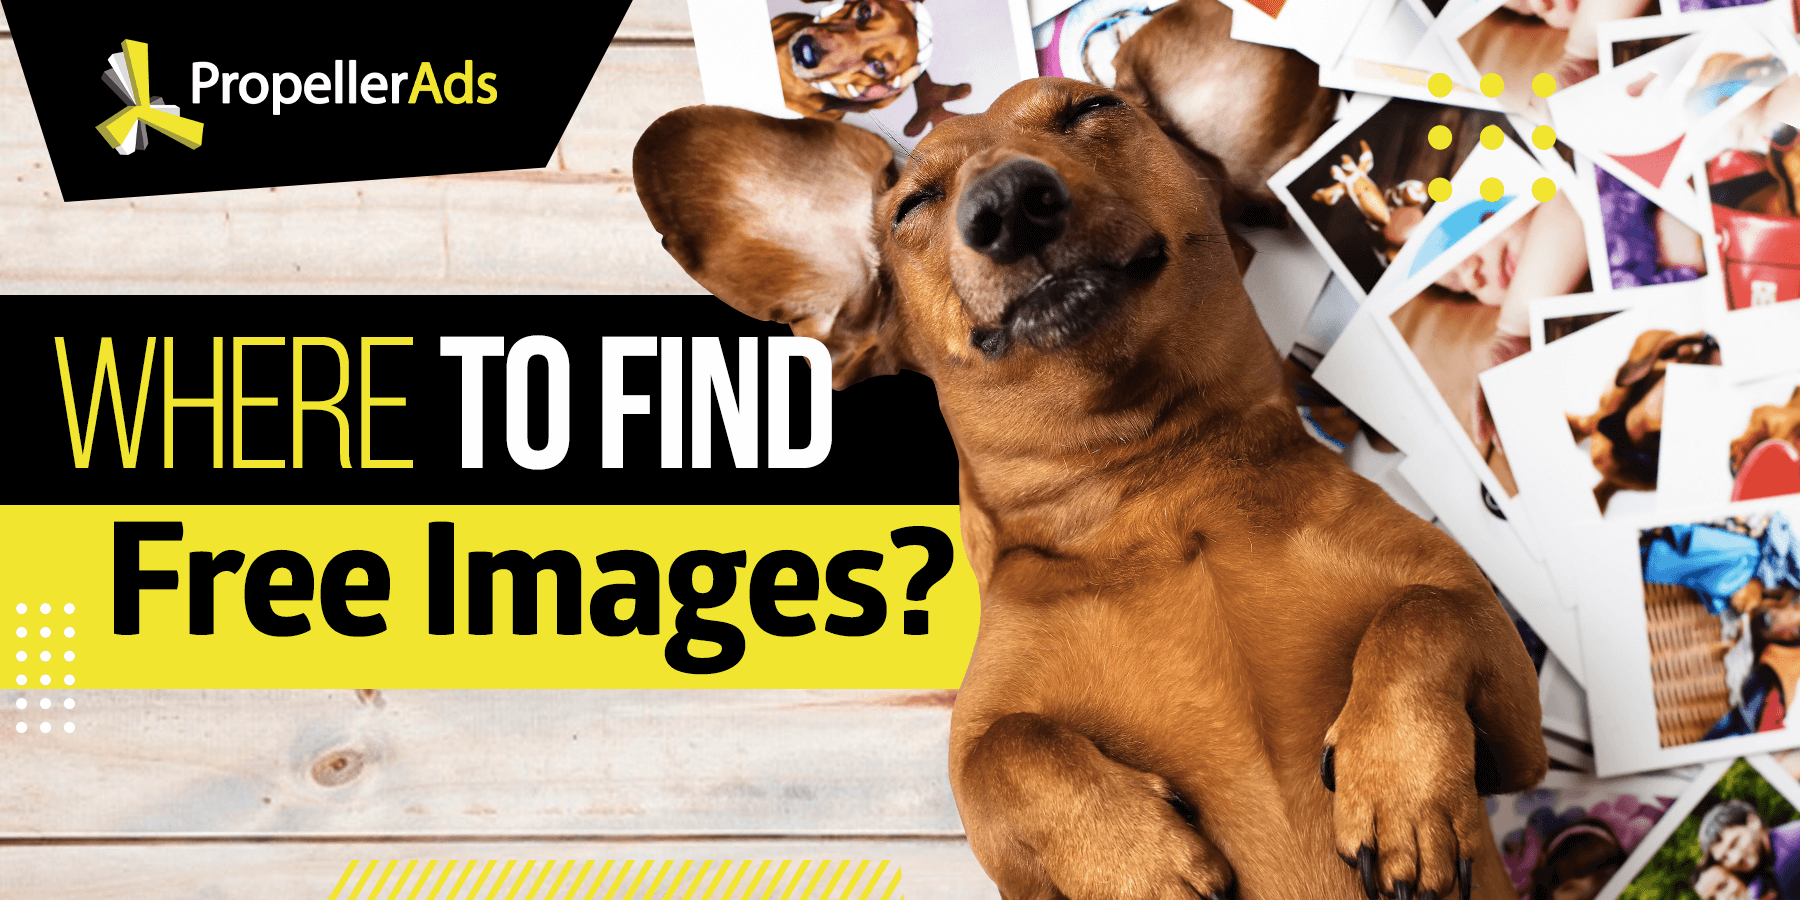 Where to find free images